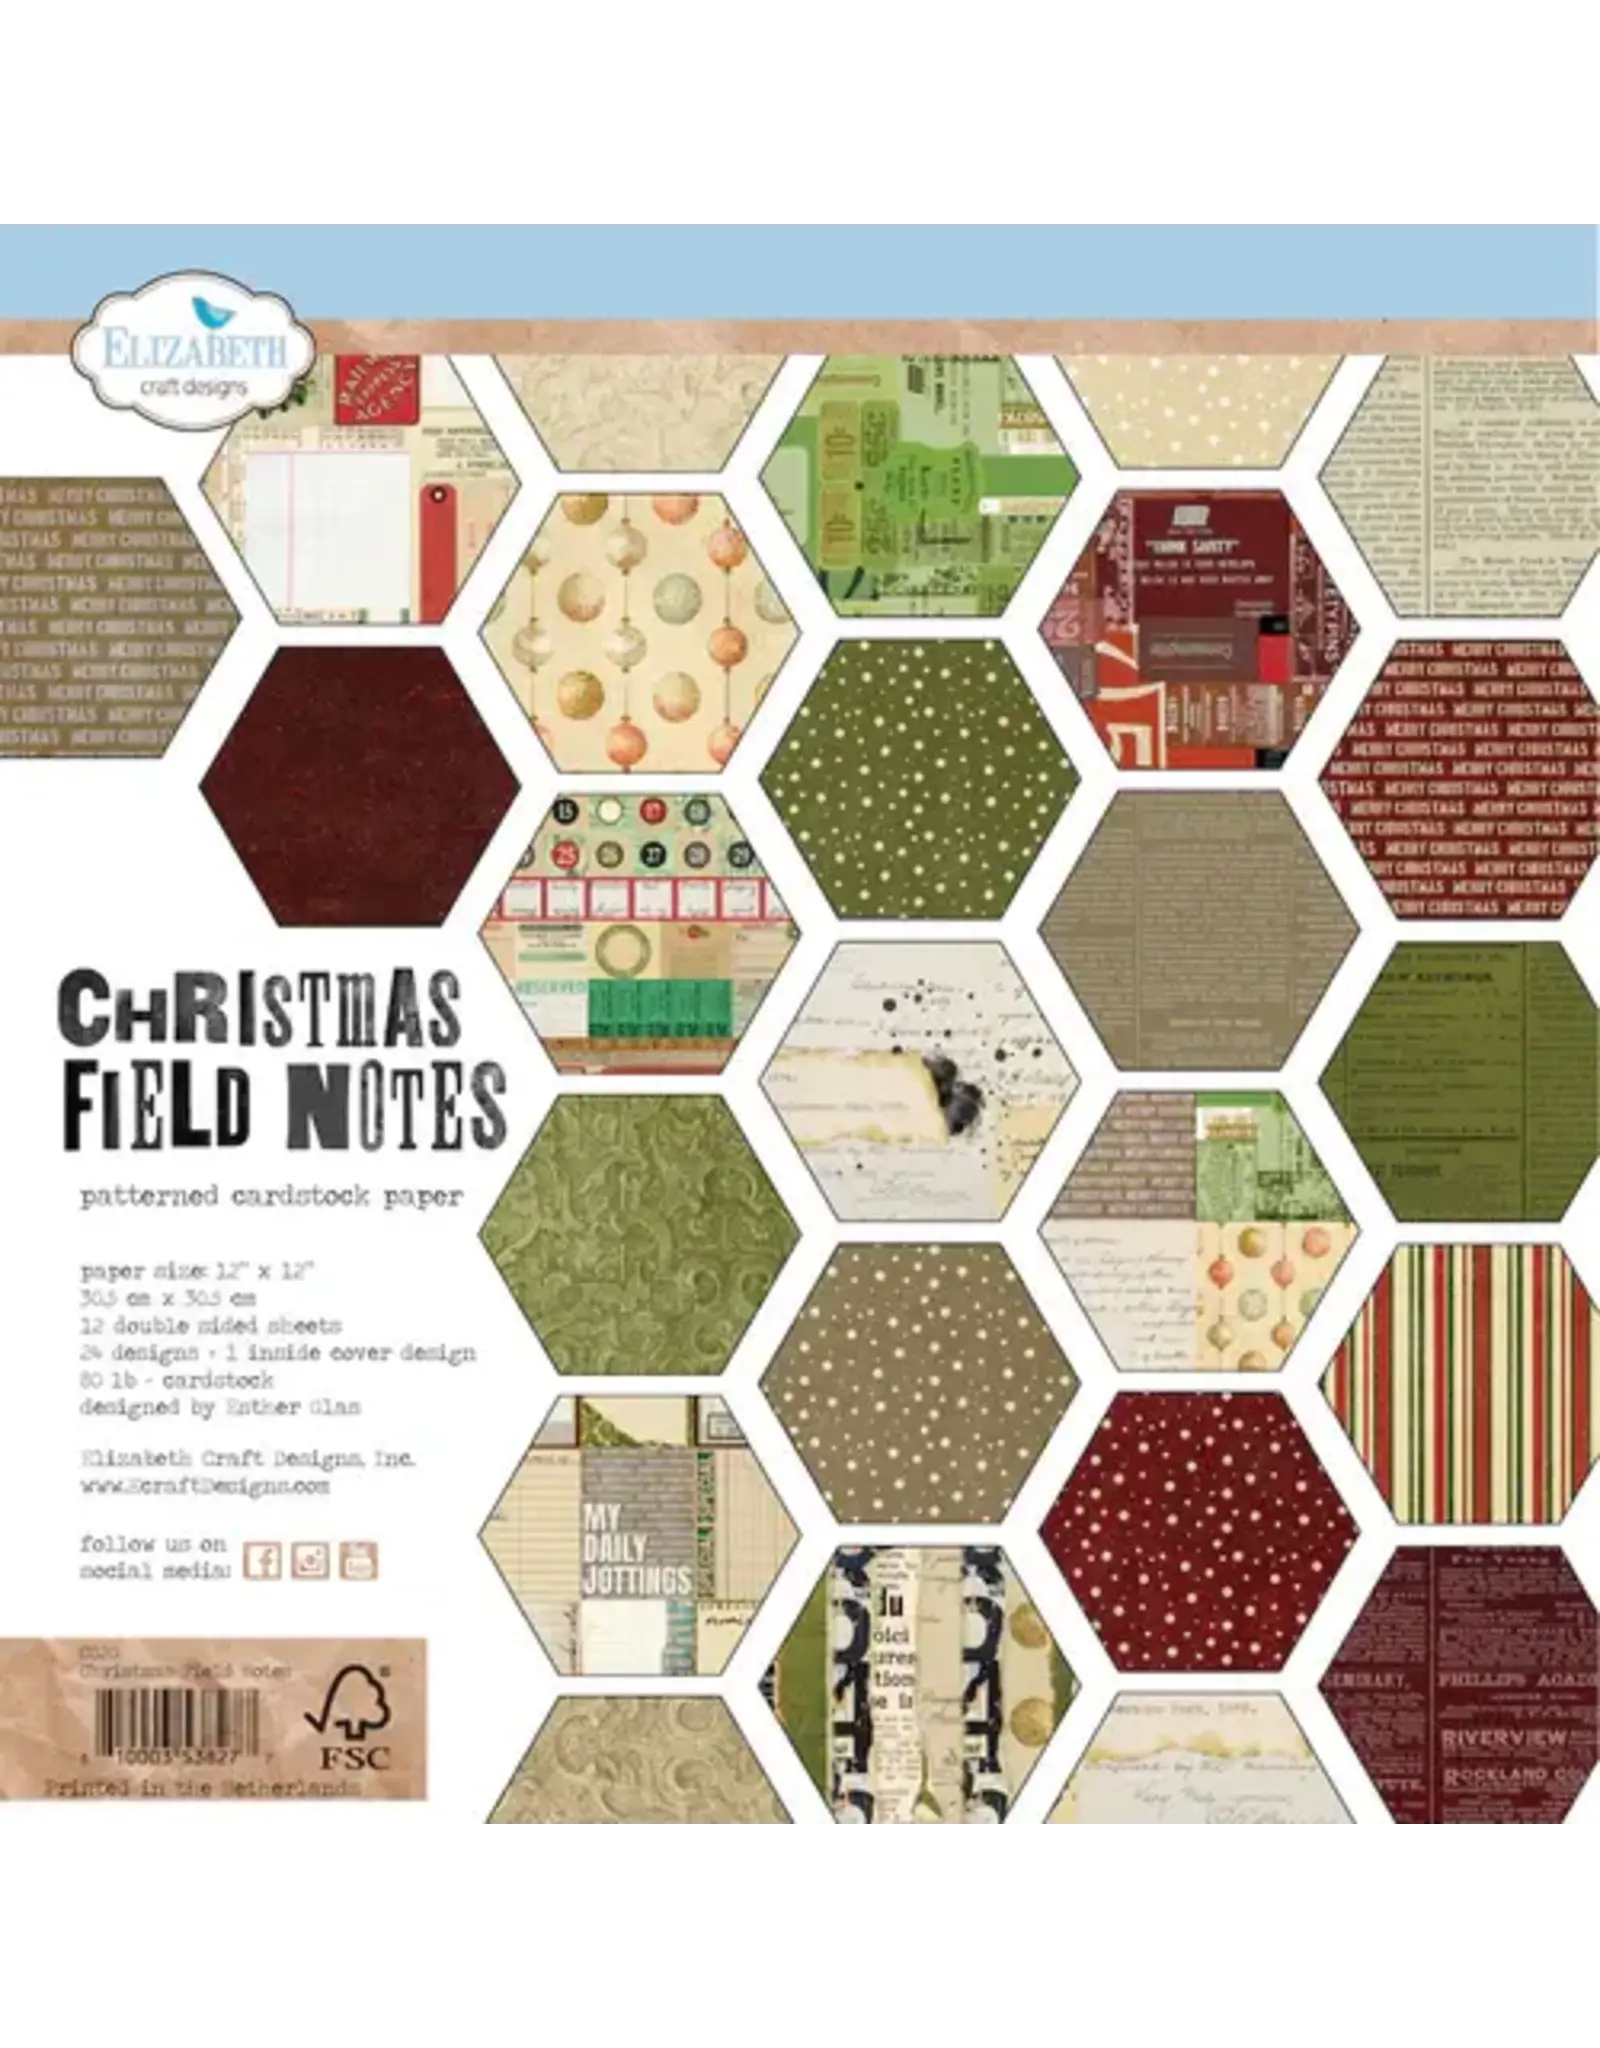 ELIZABETH CRAFT DESIGNS ELIZABETH CRAFT DESIGNS CHRISTMAS FIELD NOTES 12X12 PAPER PACK